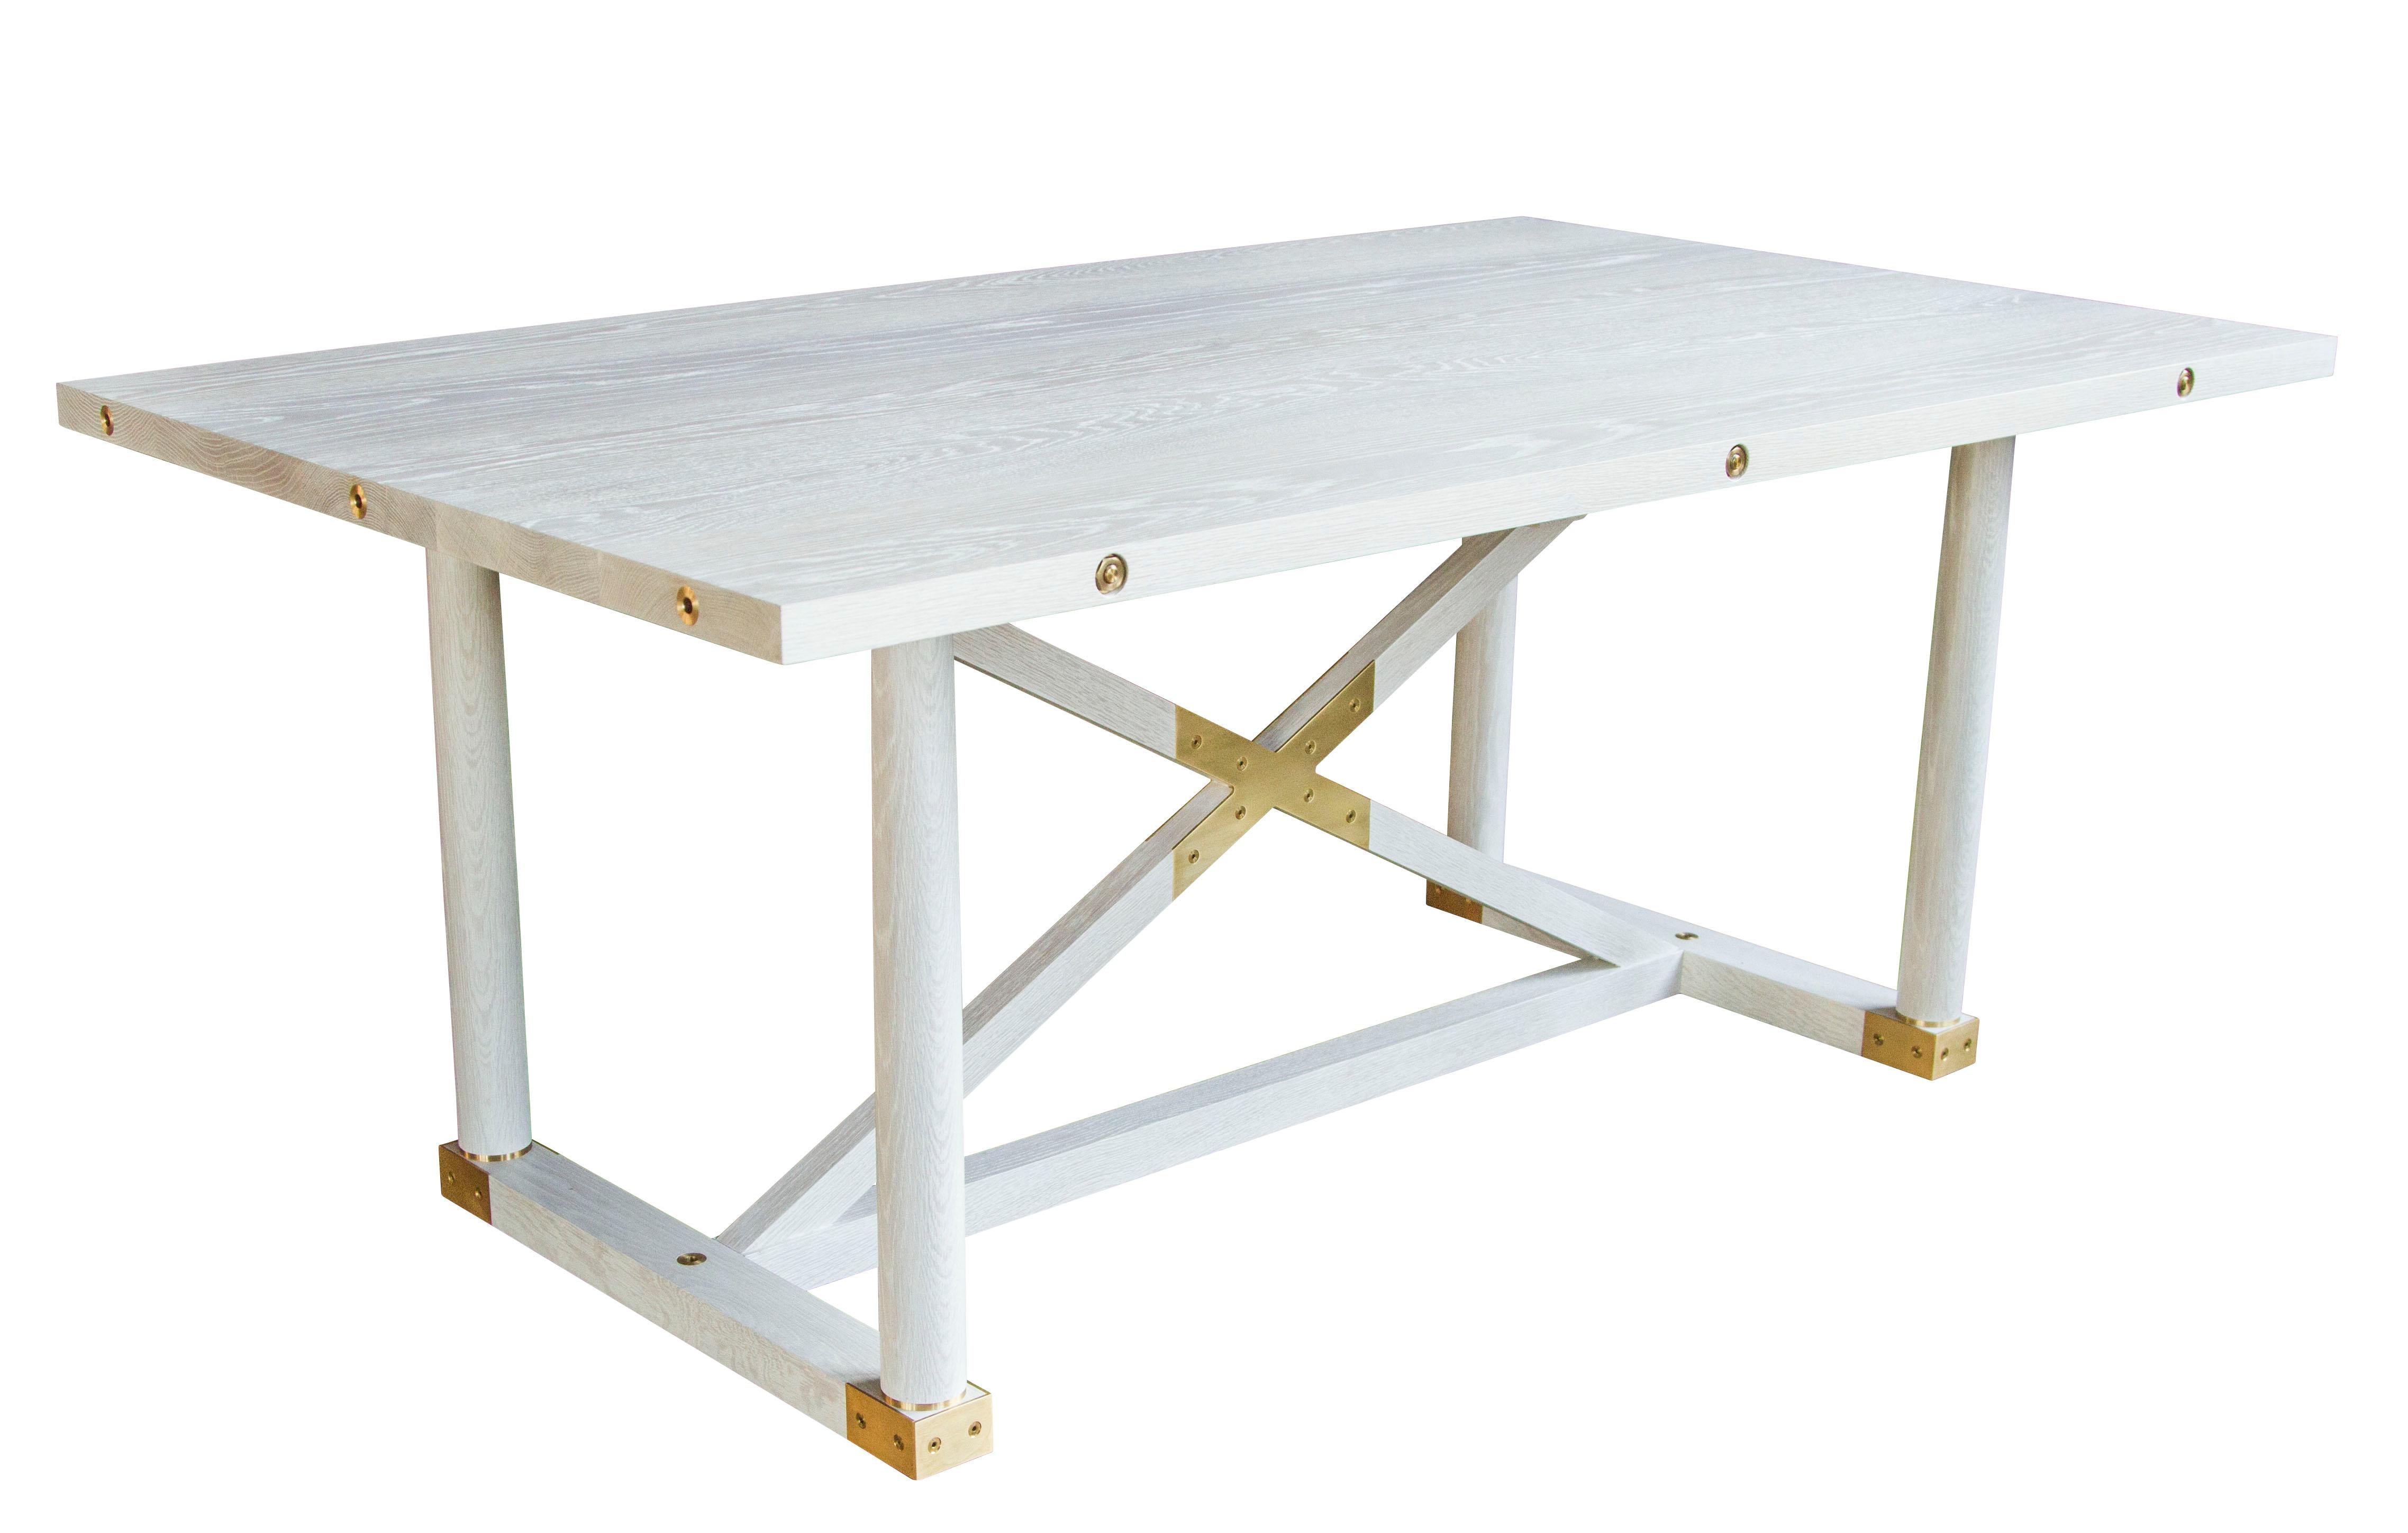 American Carden Table in Bleached White Oak- handcrafted by Richard Wrightman Design